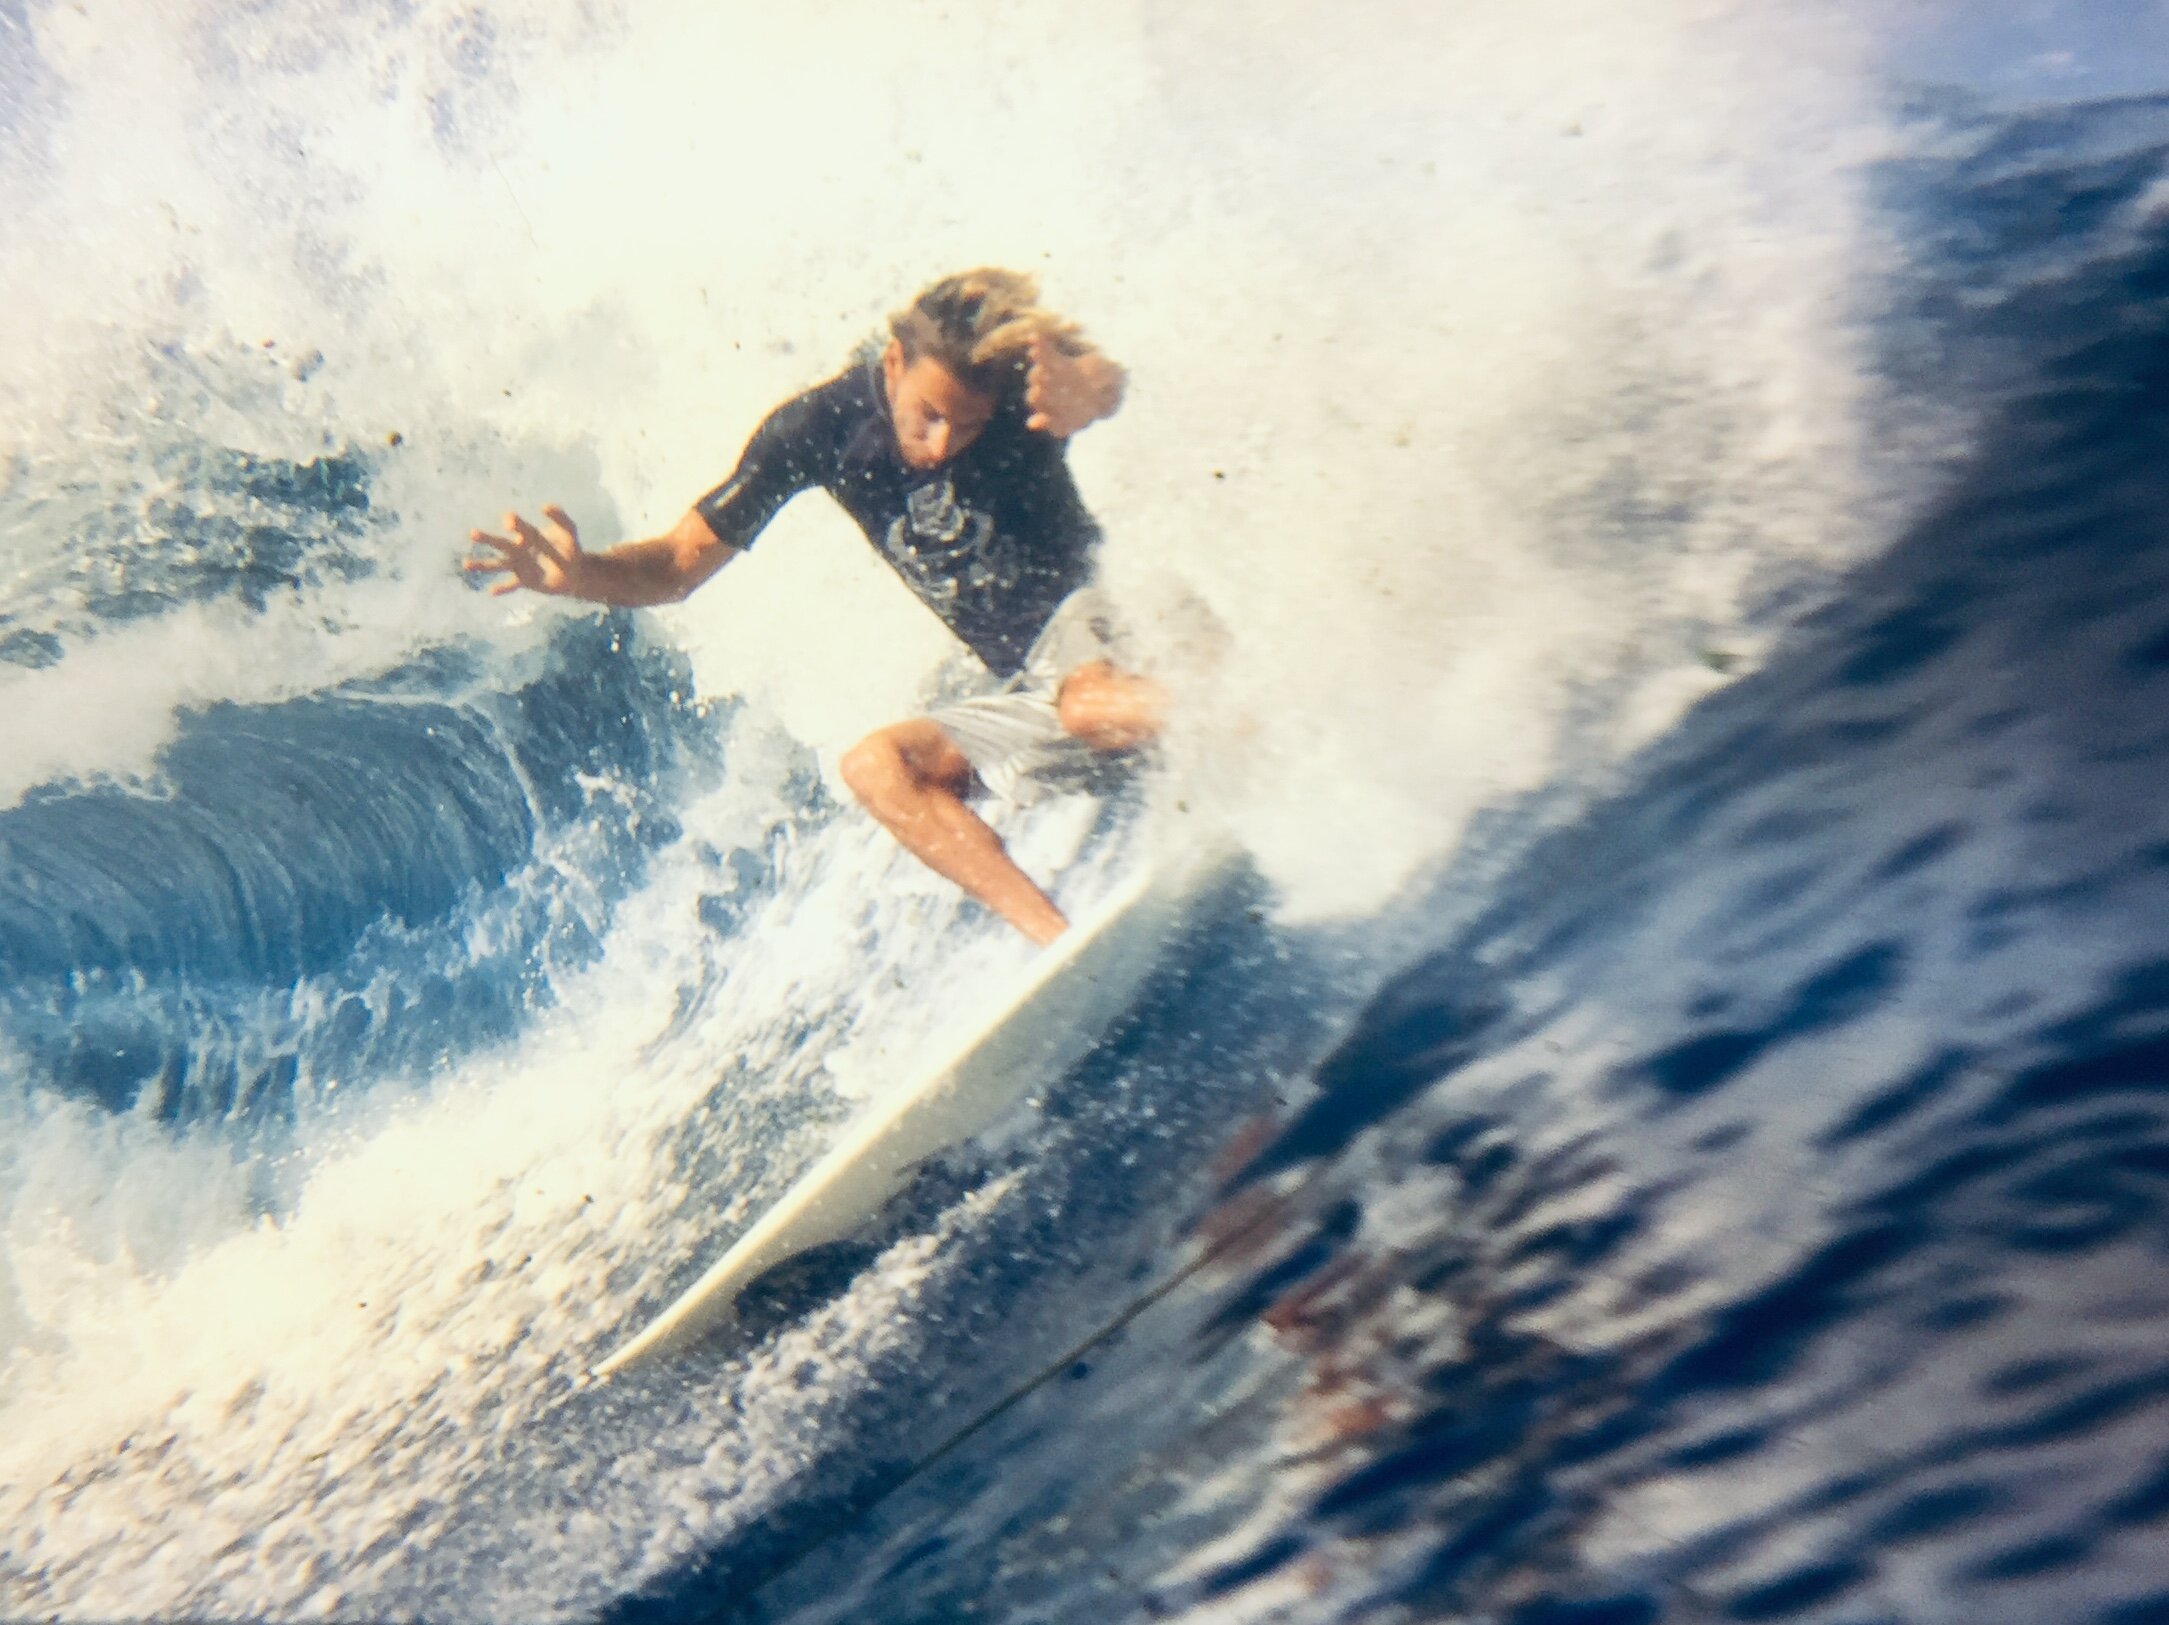  Neal Purchase Junior might appear as a cruisy surfer/shaper/muso these days but he was an animal with his high speed contortions back in the day 